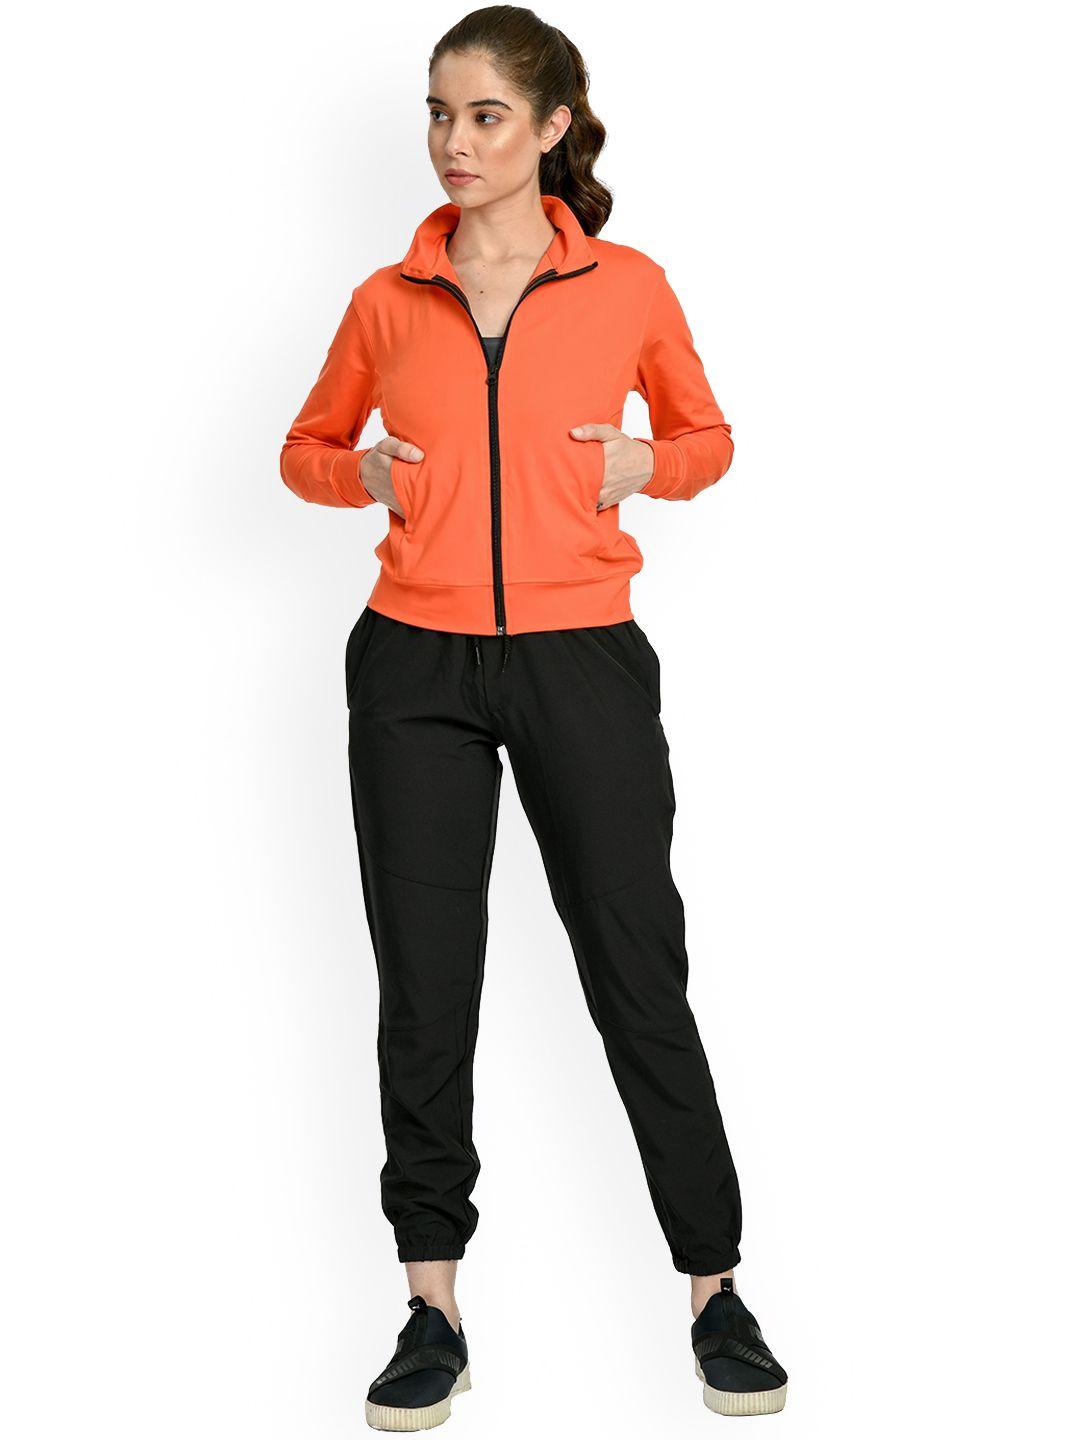 body smith mock collar long sleeves dry fit training or gym sporty jacket